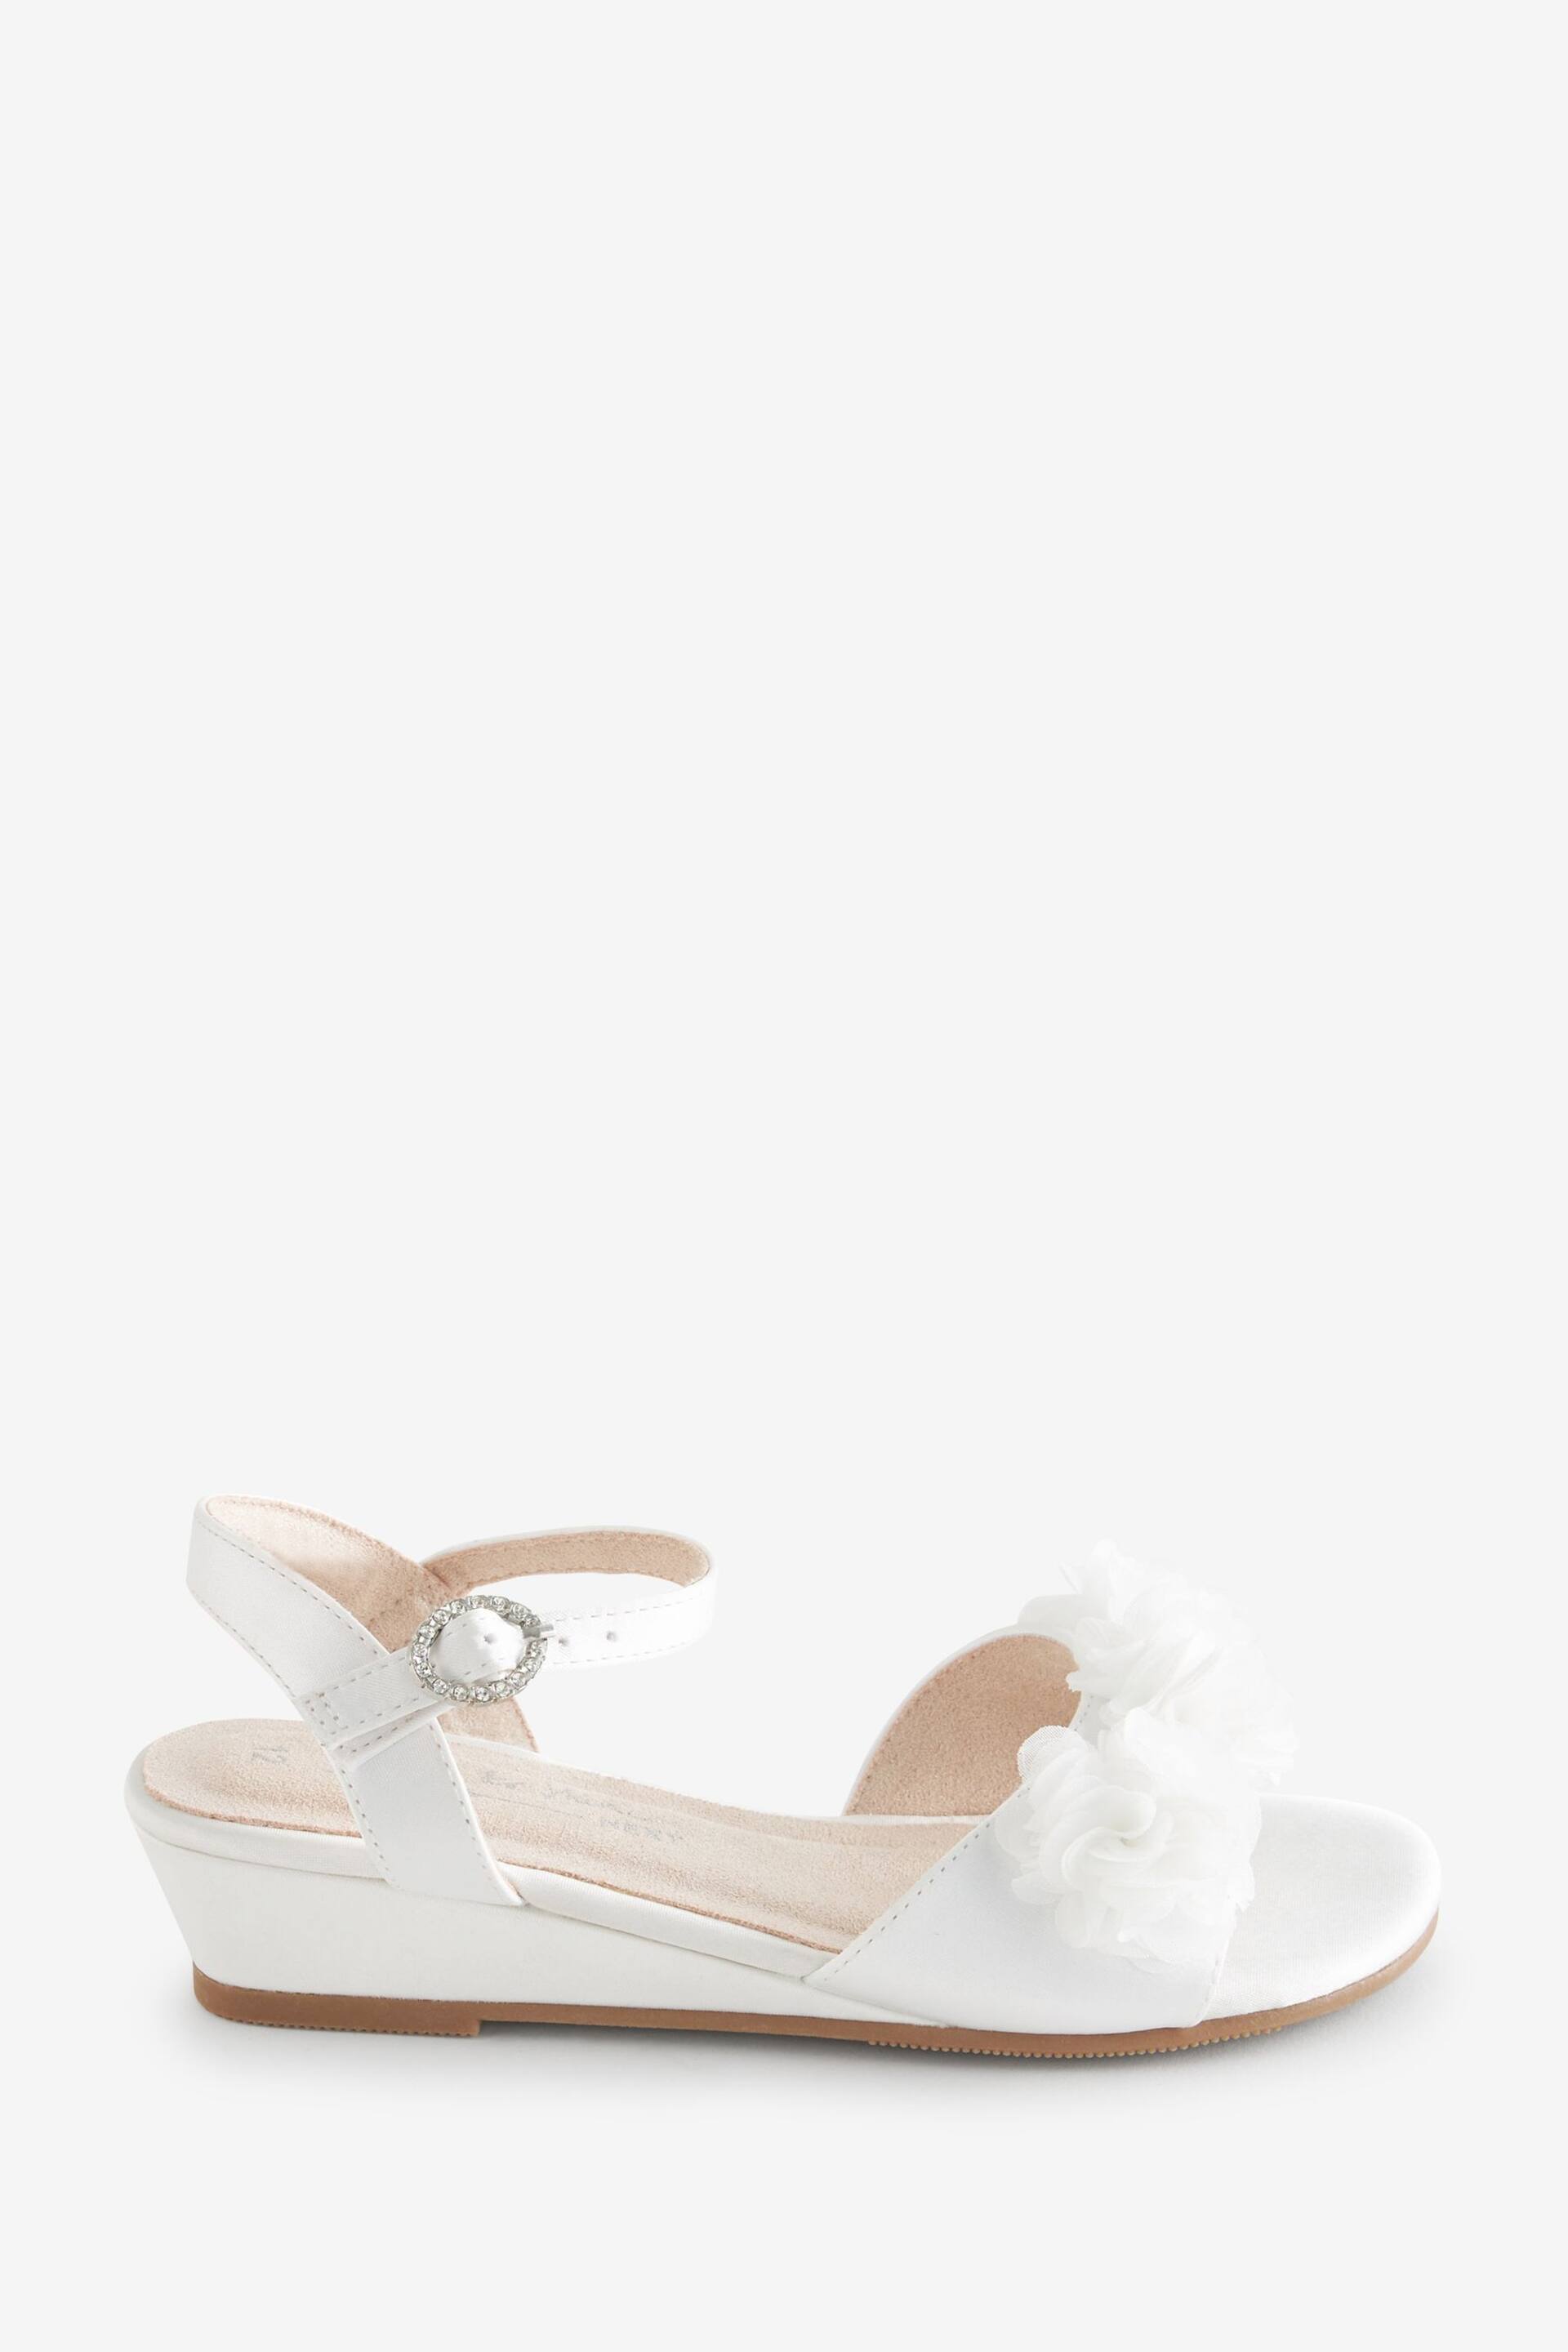 White Wedge Occasion Corsage Flower Sandals - Image 2 of 4